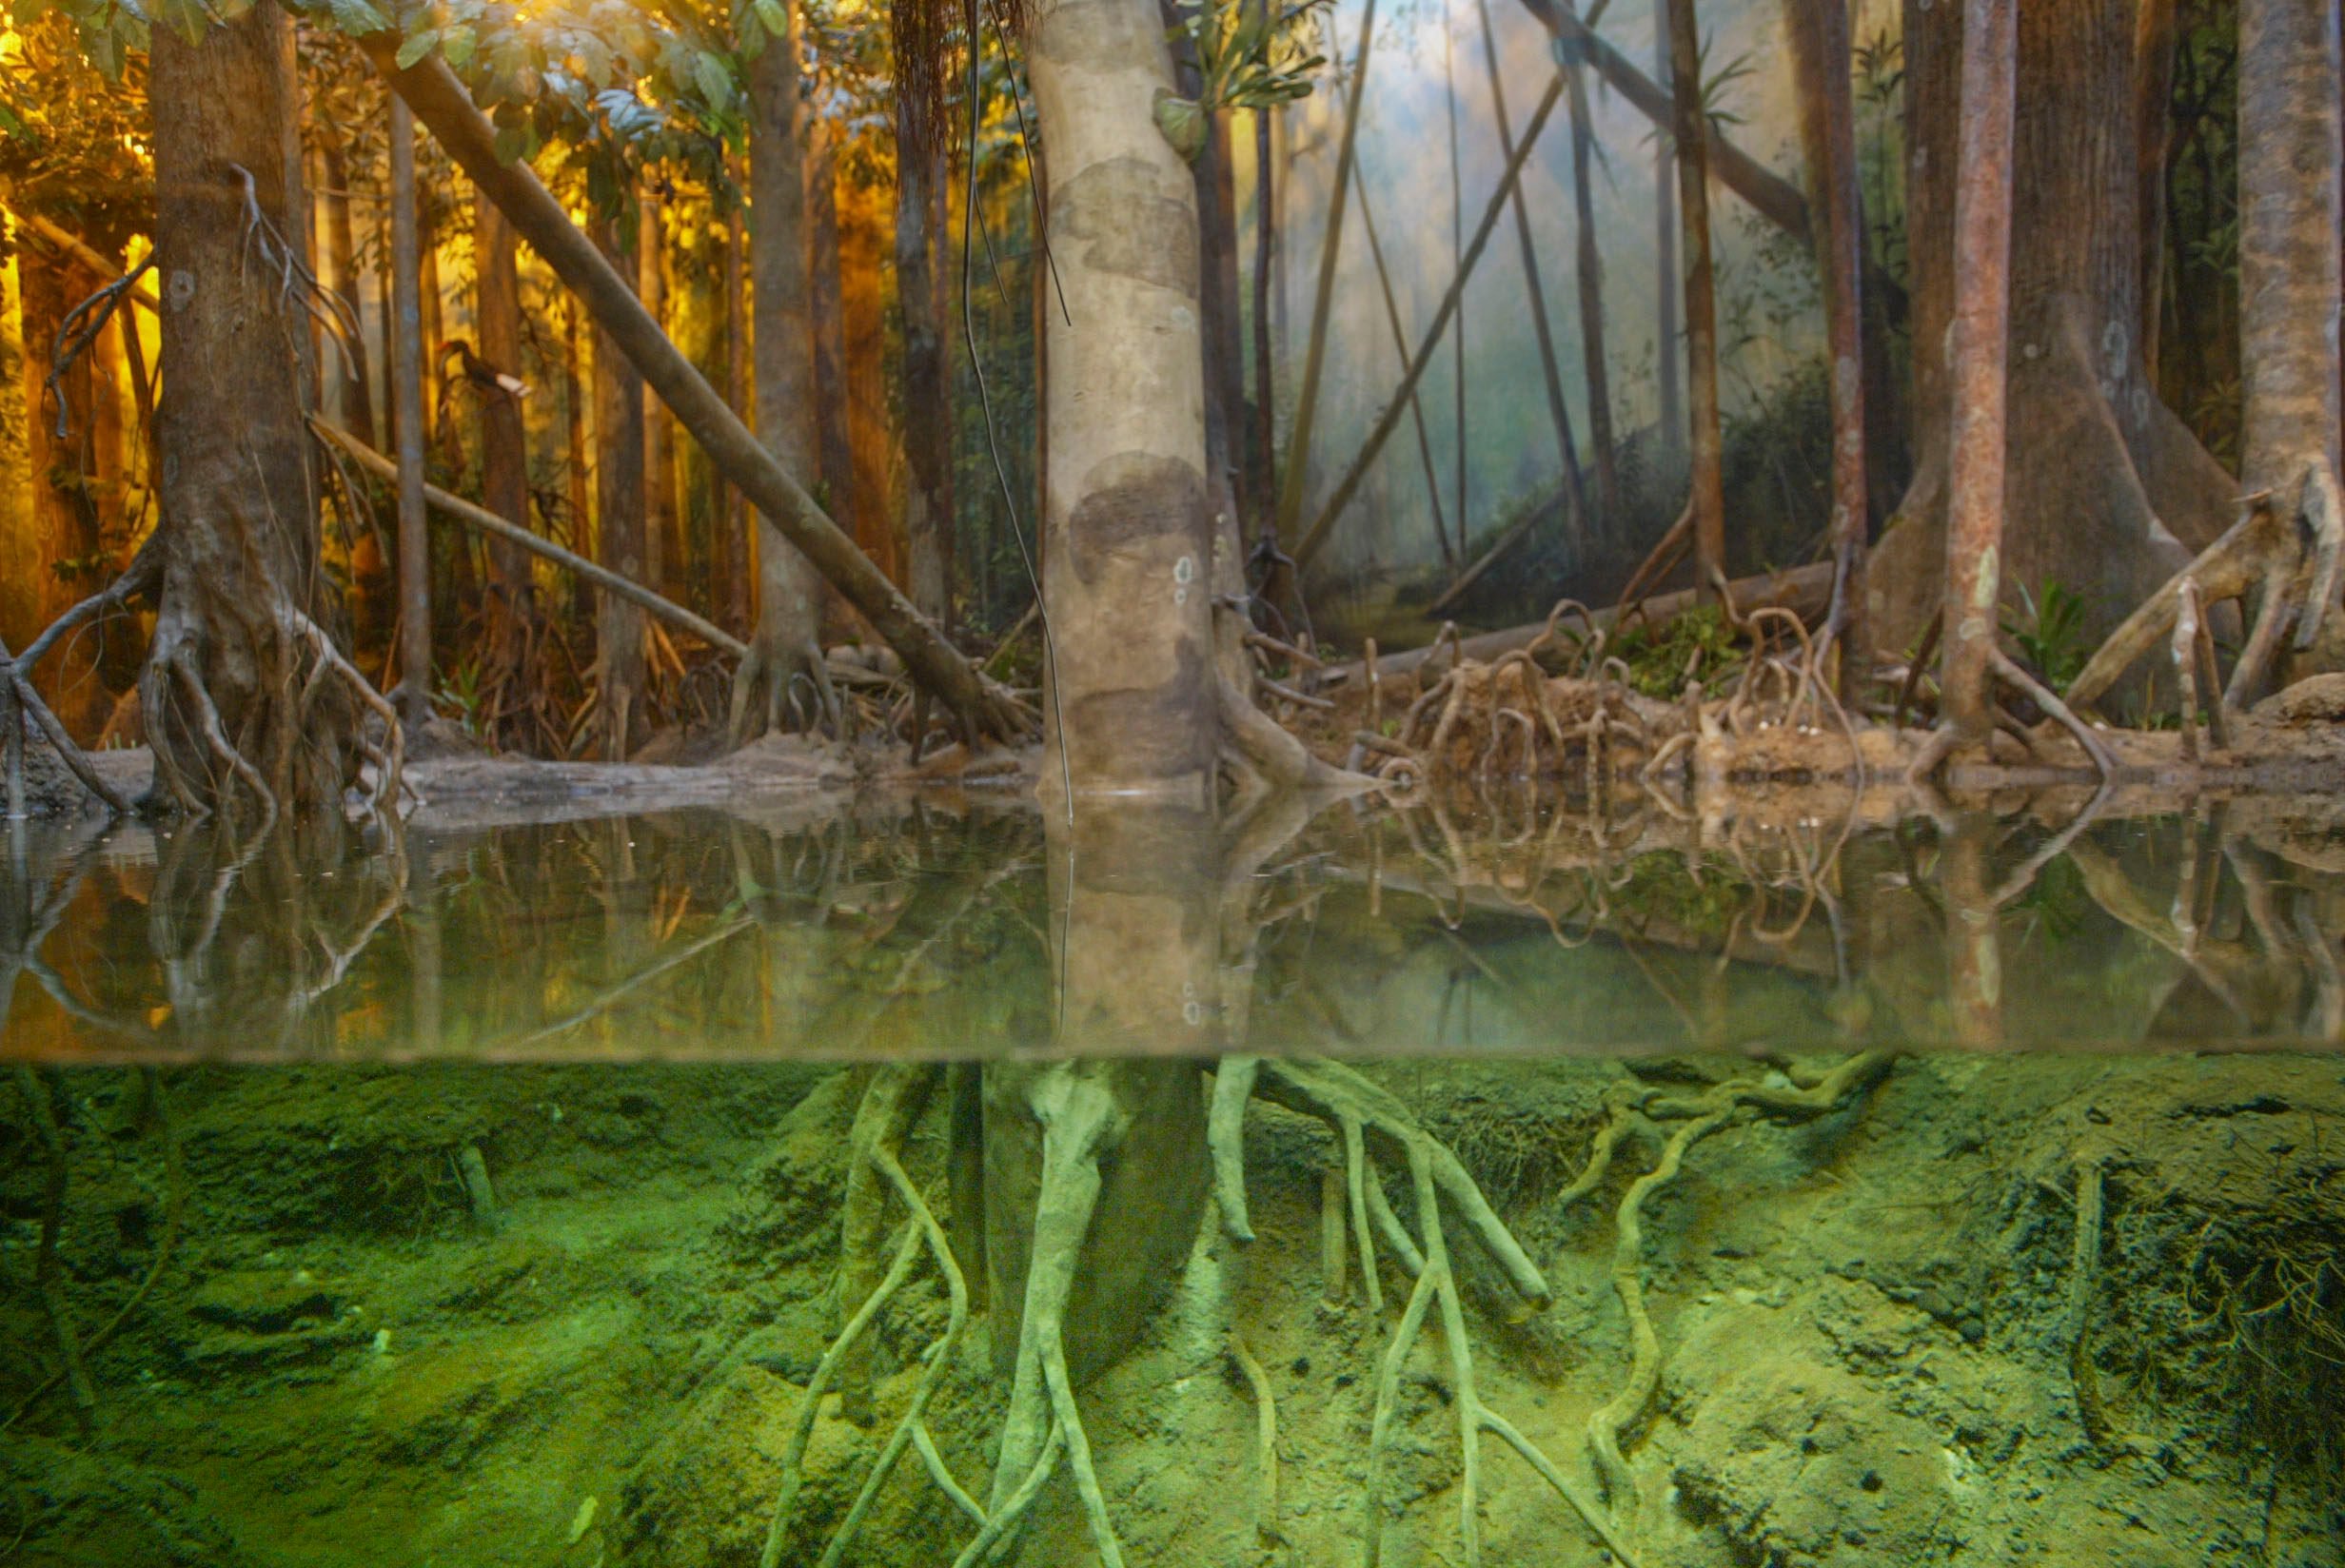 Mangroves in Hong Kong Wetland Park. The trees and their capacity to absorb carbon dioxide were in focus as a  weapon against climate change at the UN’s Cop28 summit in Dubai. Photo: SCMP